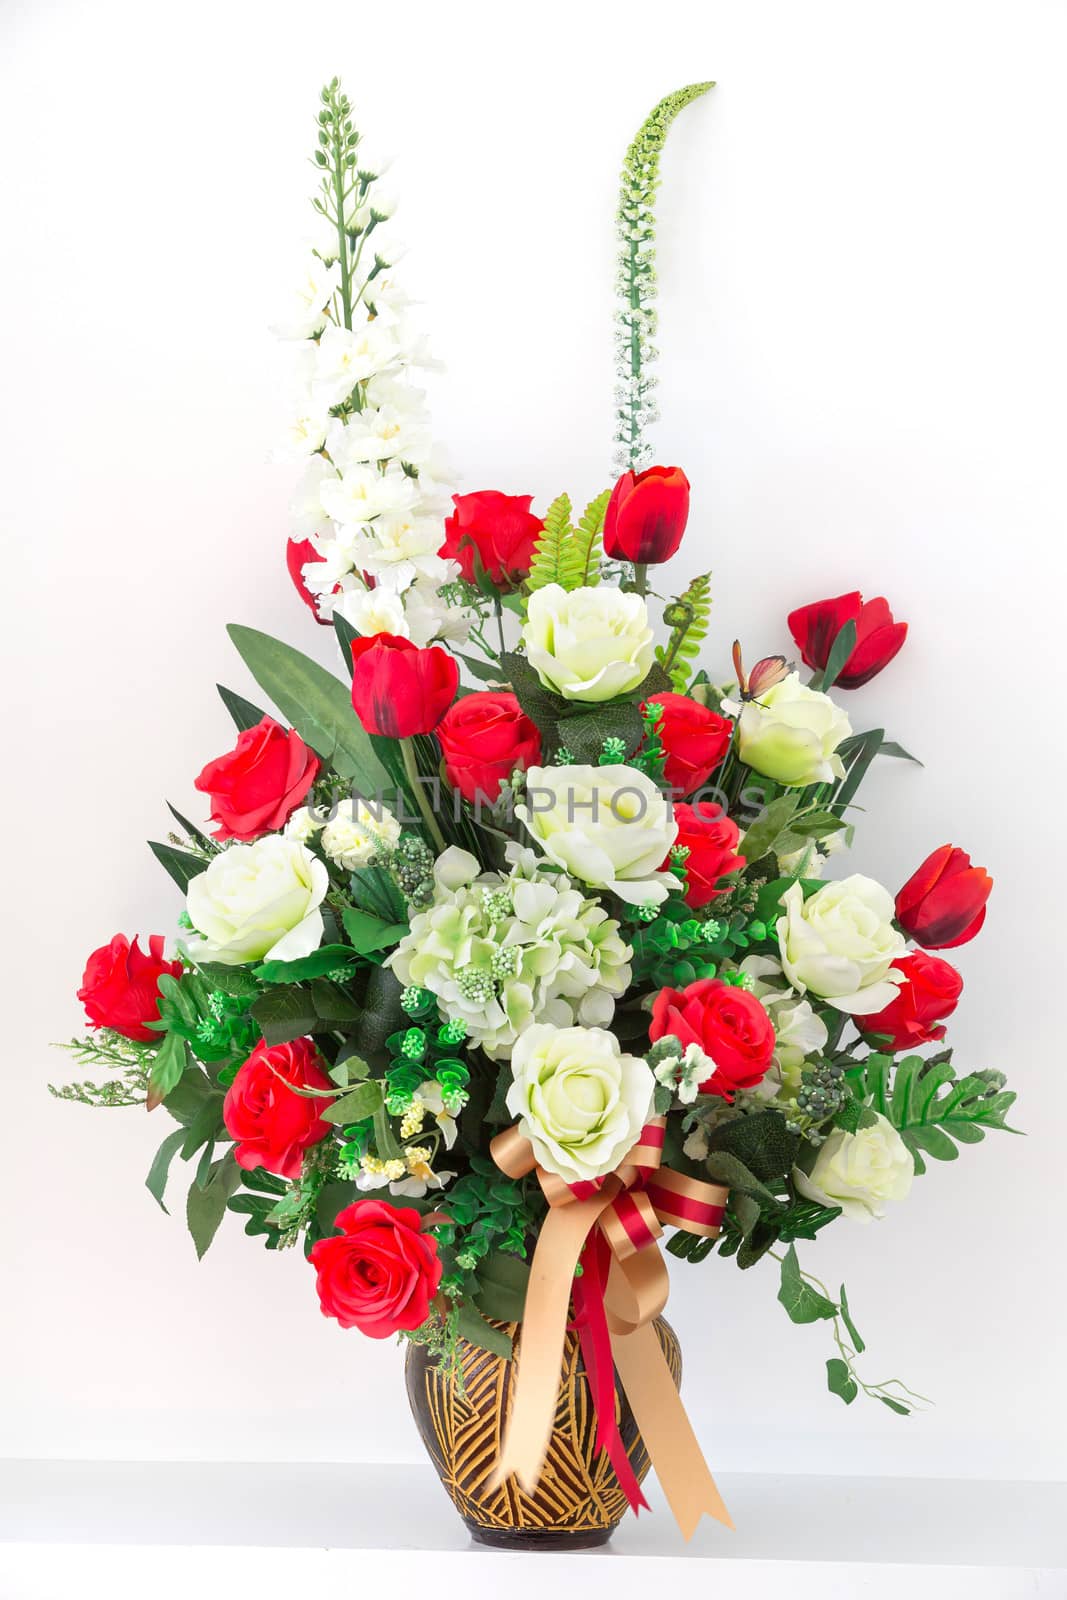 Bouquet of red and white roses in a vase